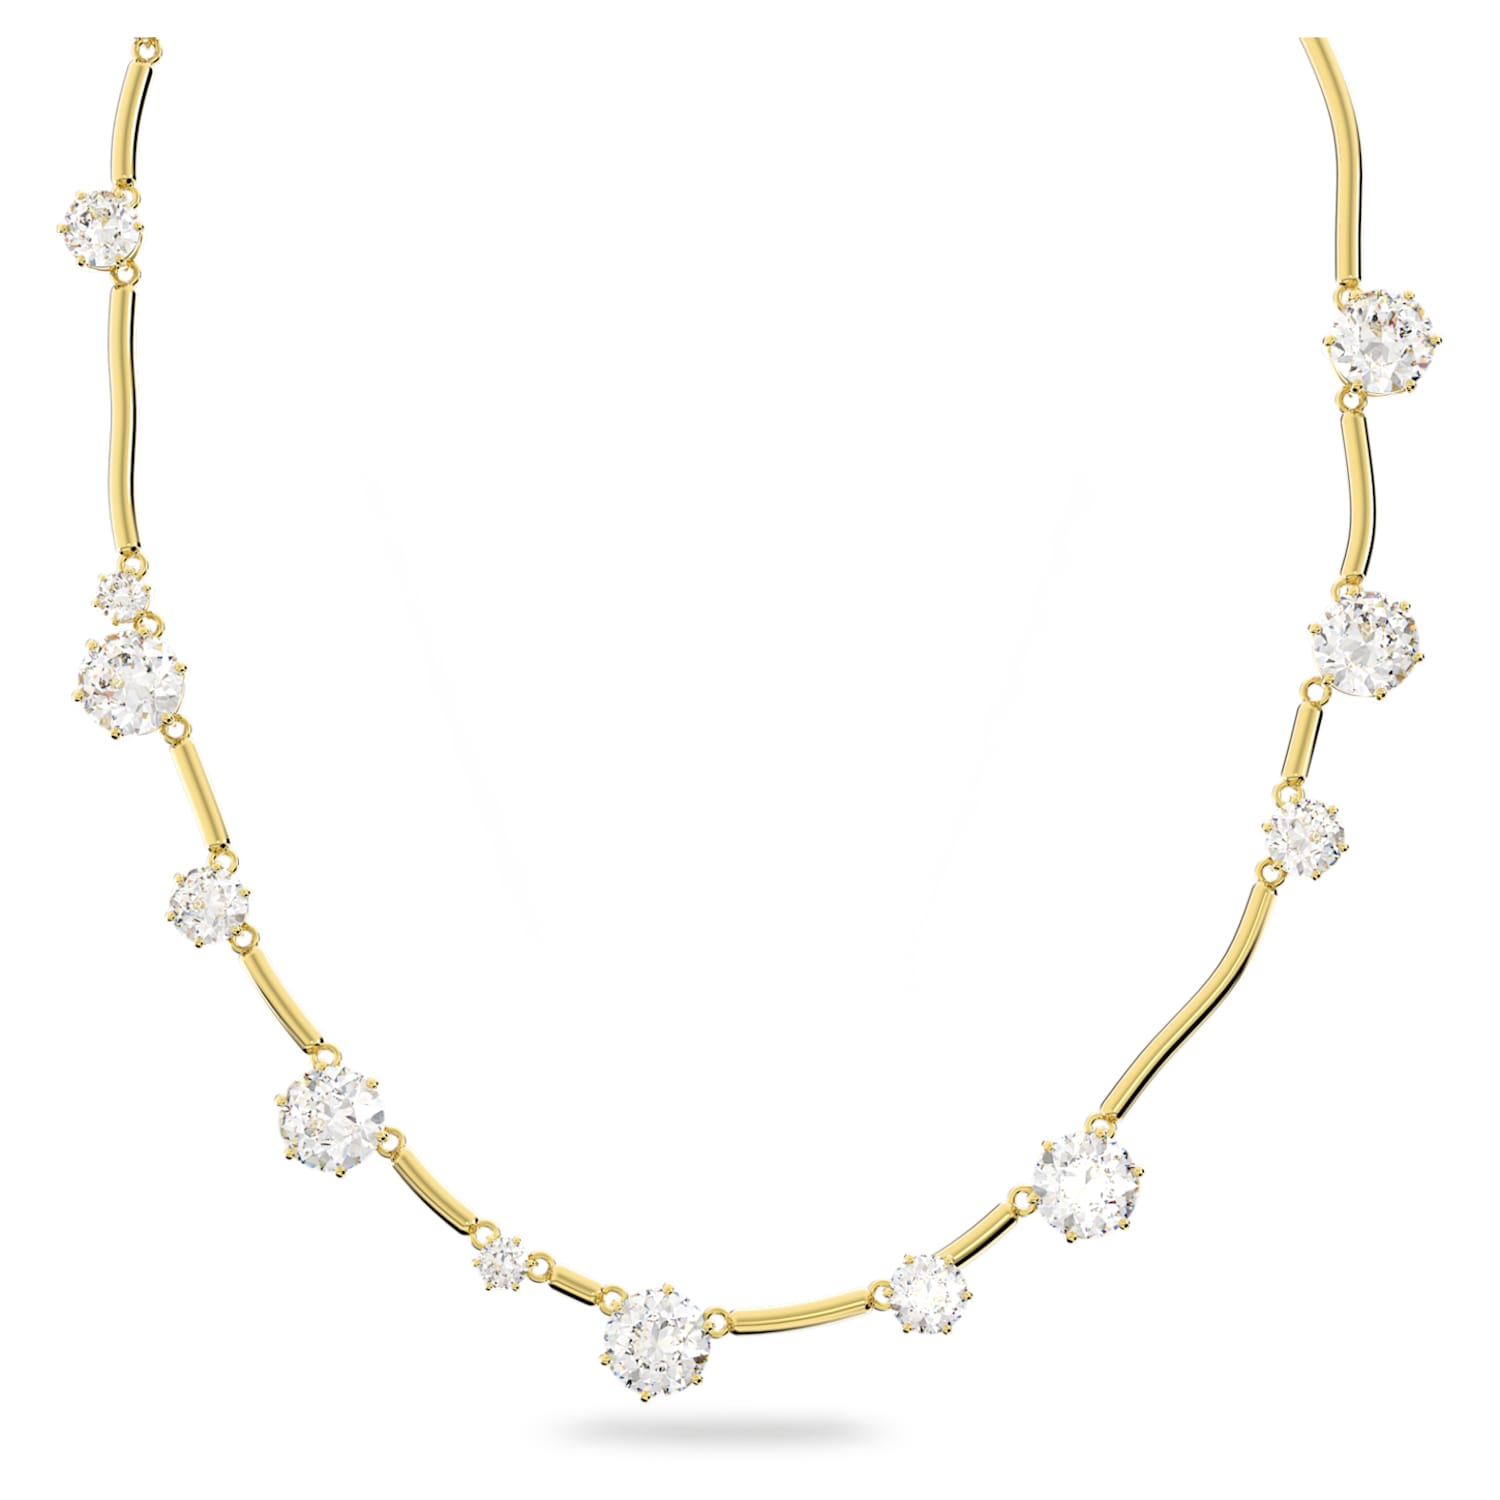 Constella necklace, Mixed round cuts, White, Gold-tone plated